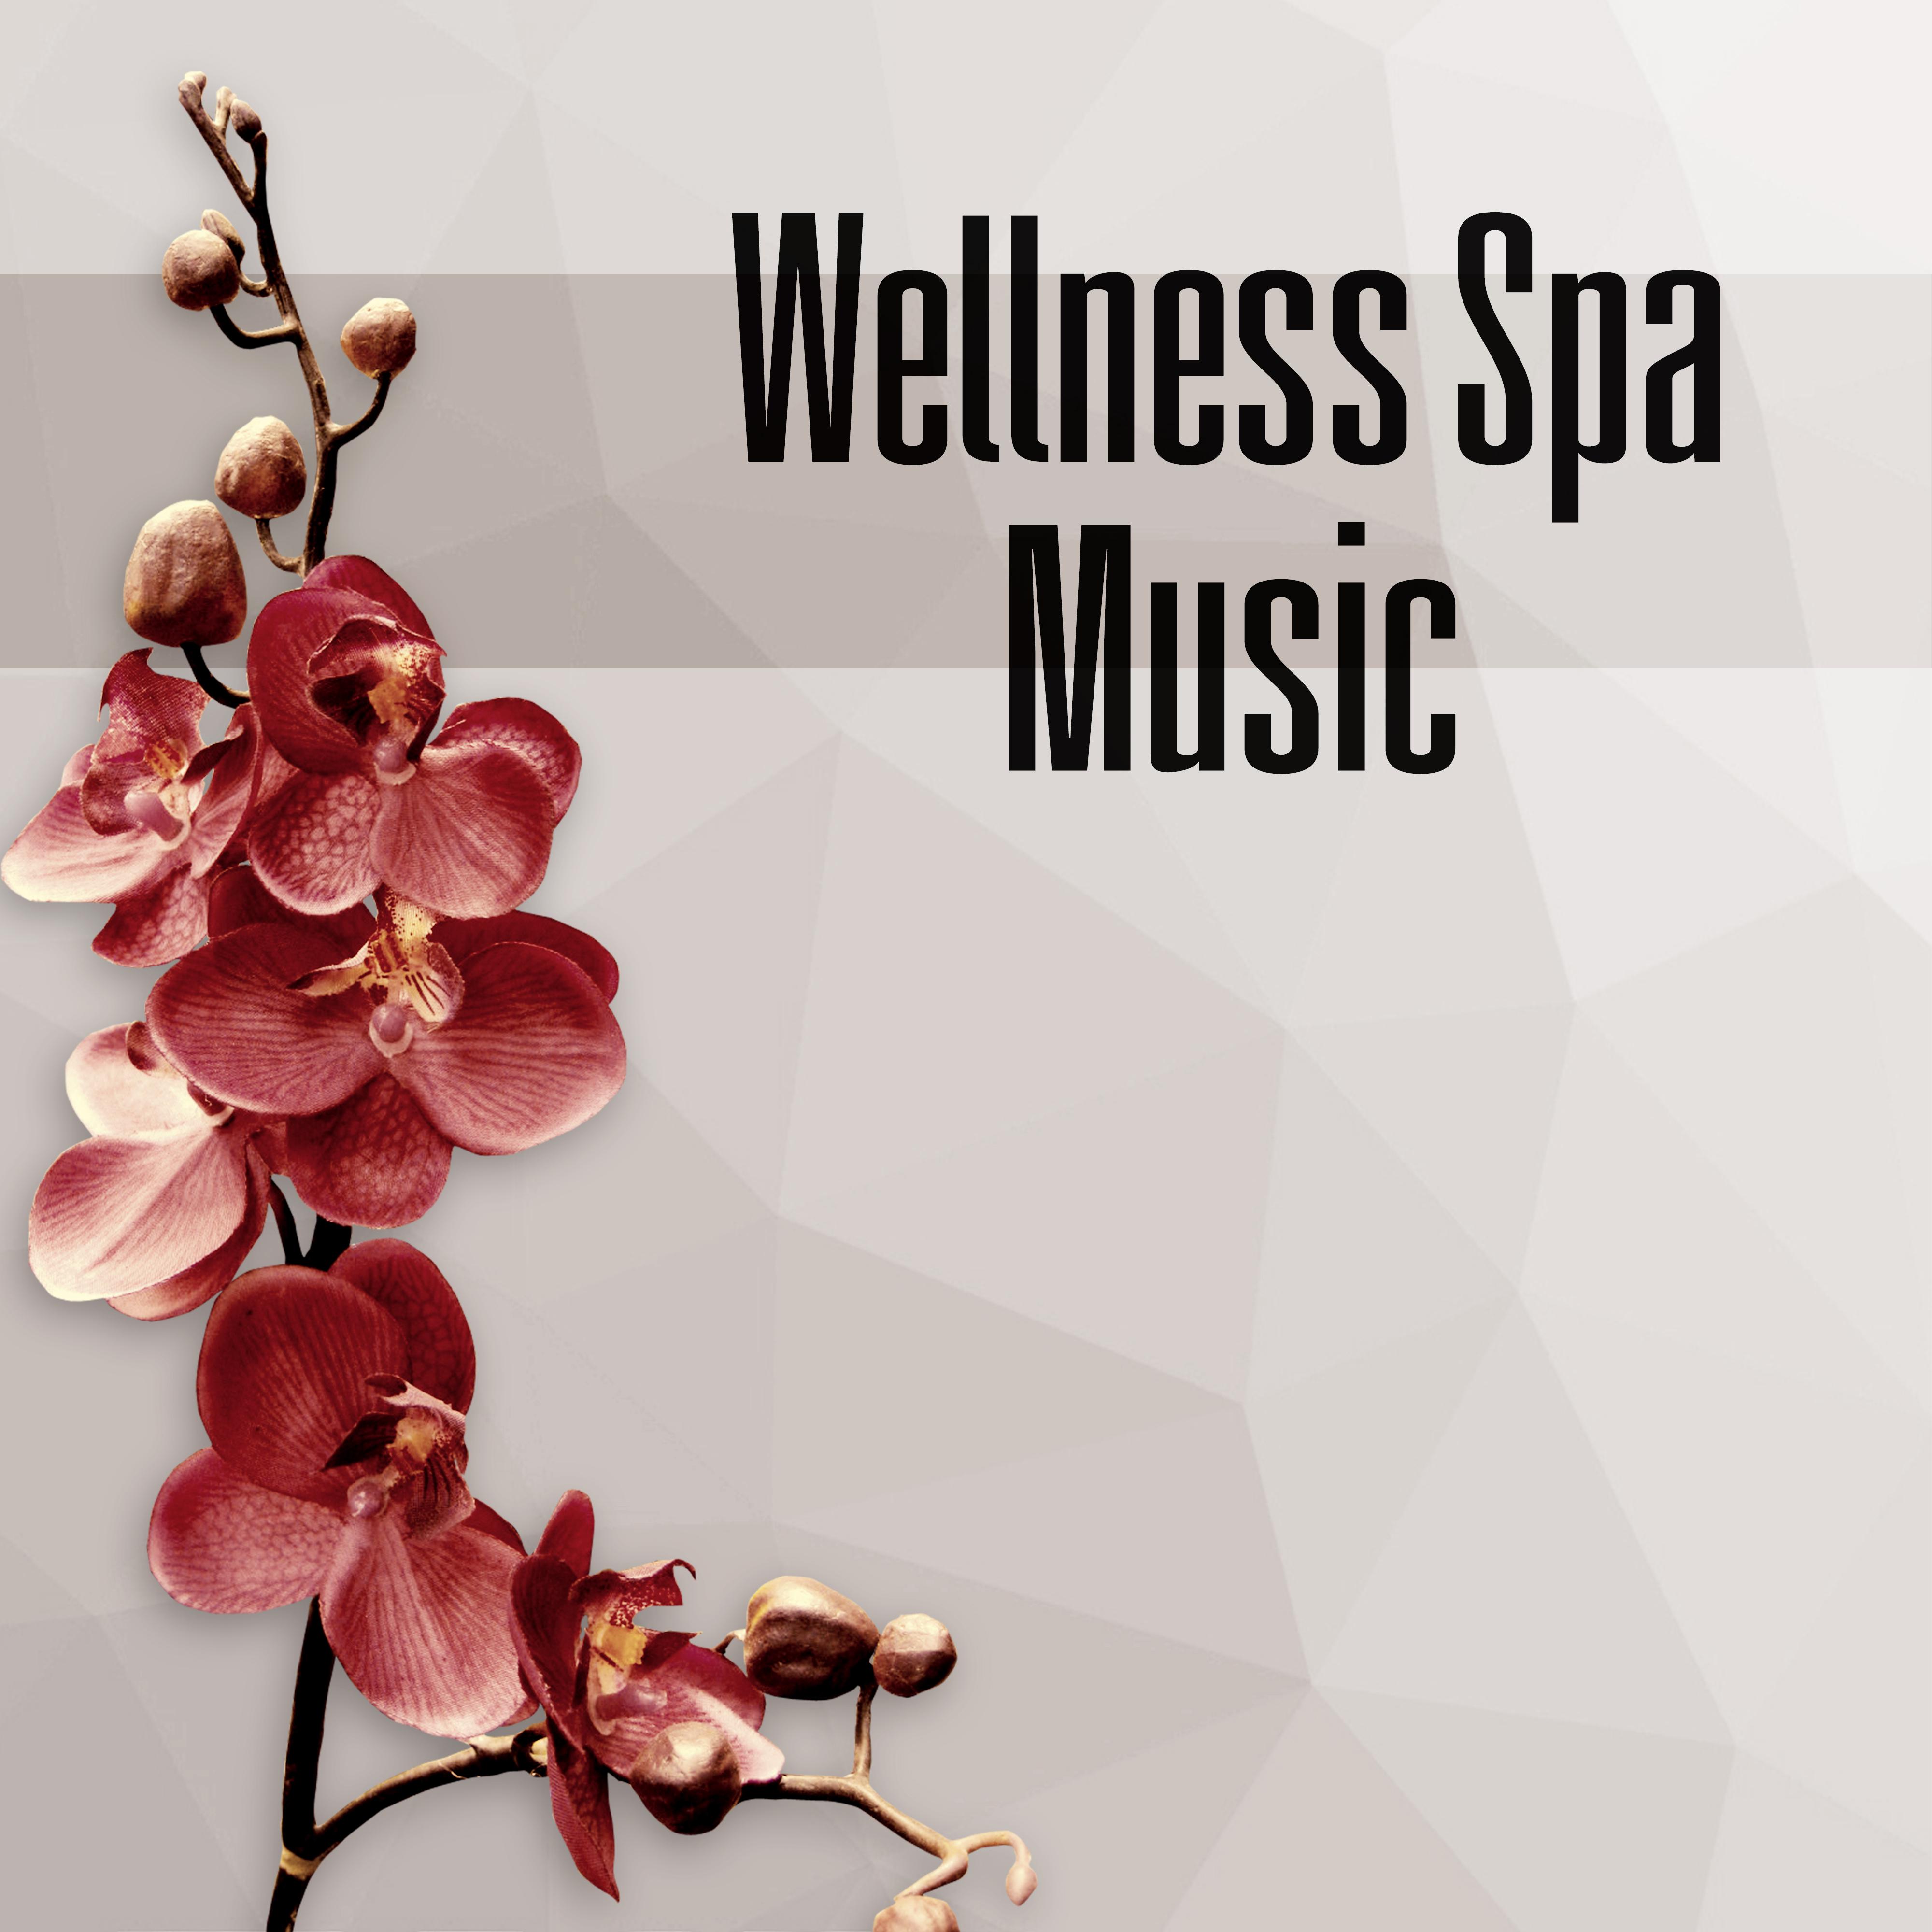 Wellness Spa Music  Beauty Spa, Nature Sounds, Serenity Spa, Wellness, Relaxation Meditation, Inner Silence, Soothing Sounds, Massage